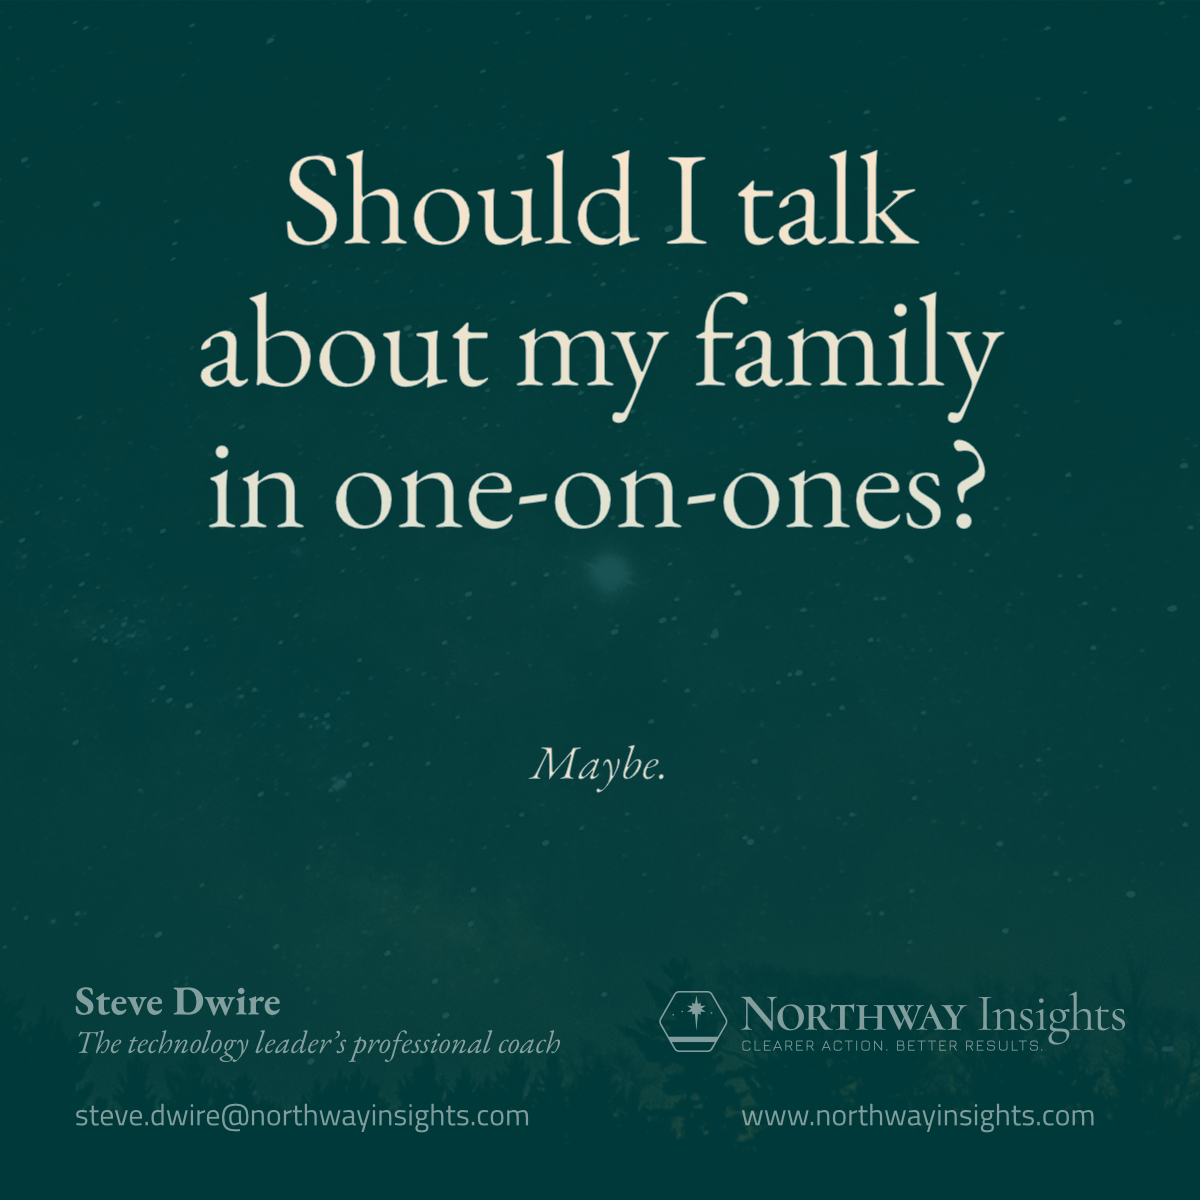 Should I talk about family in one-on-ones?